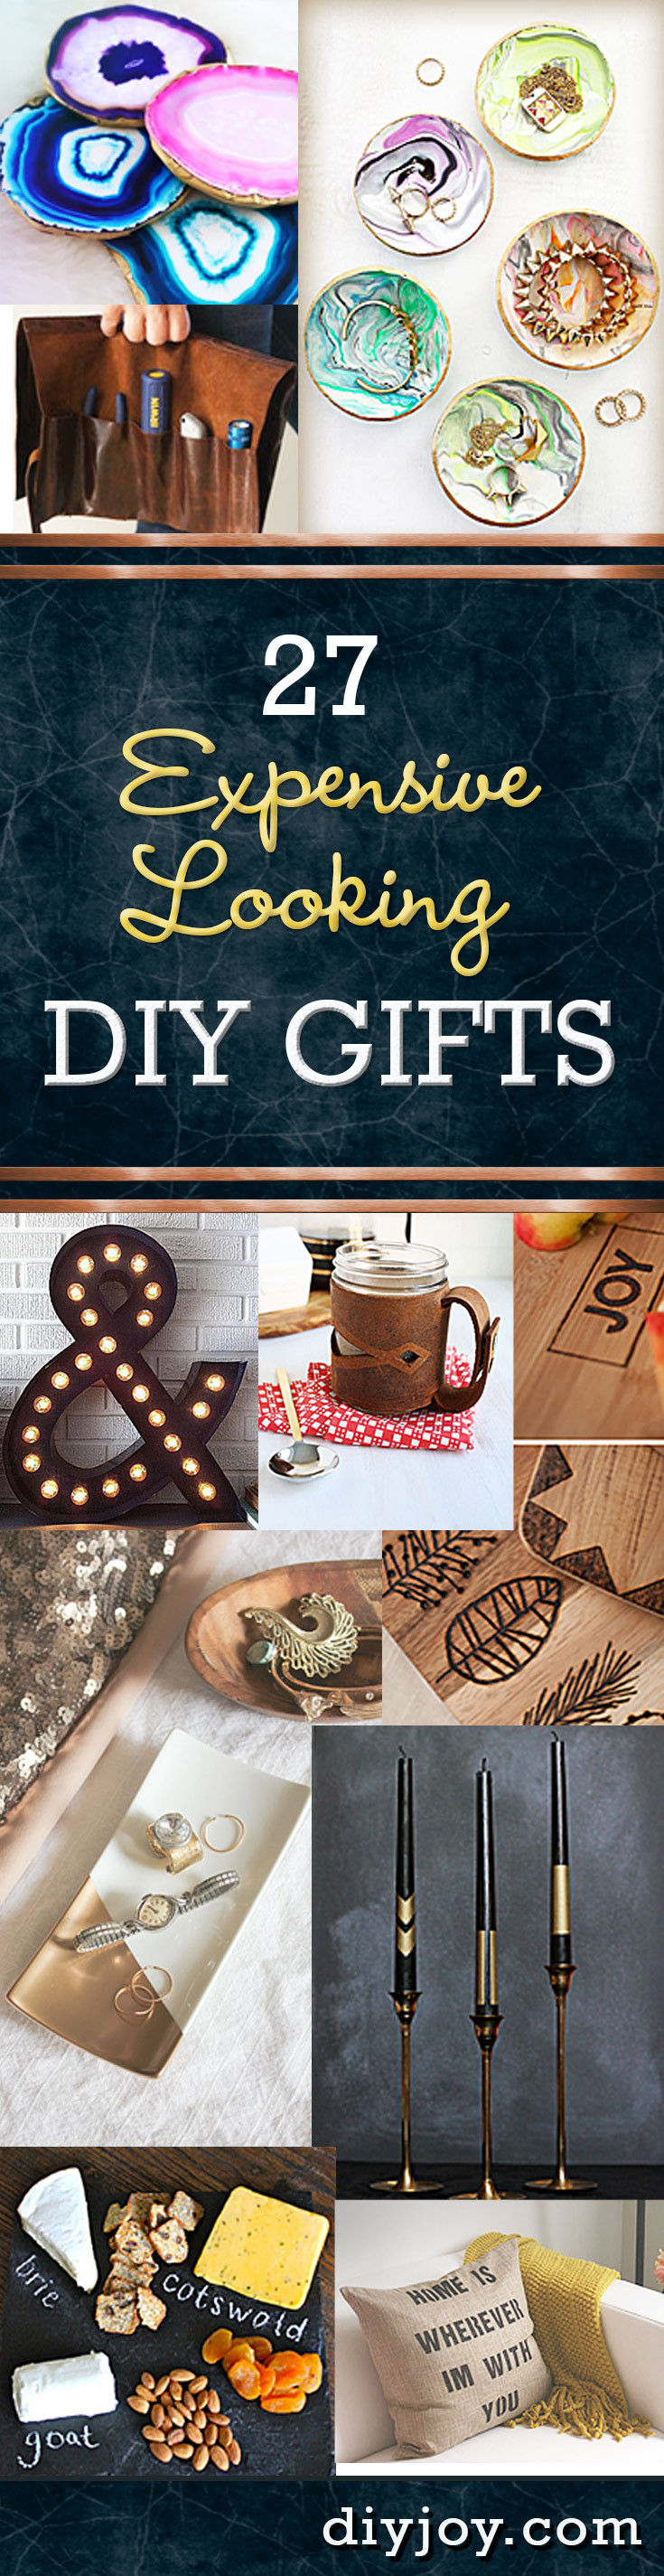 Inexpensive DIY Christmas Gifts
 27 Expensive Looking Inexpensive DIY Gifts